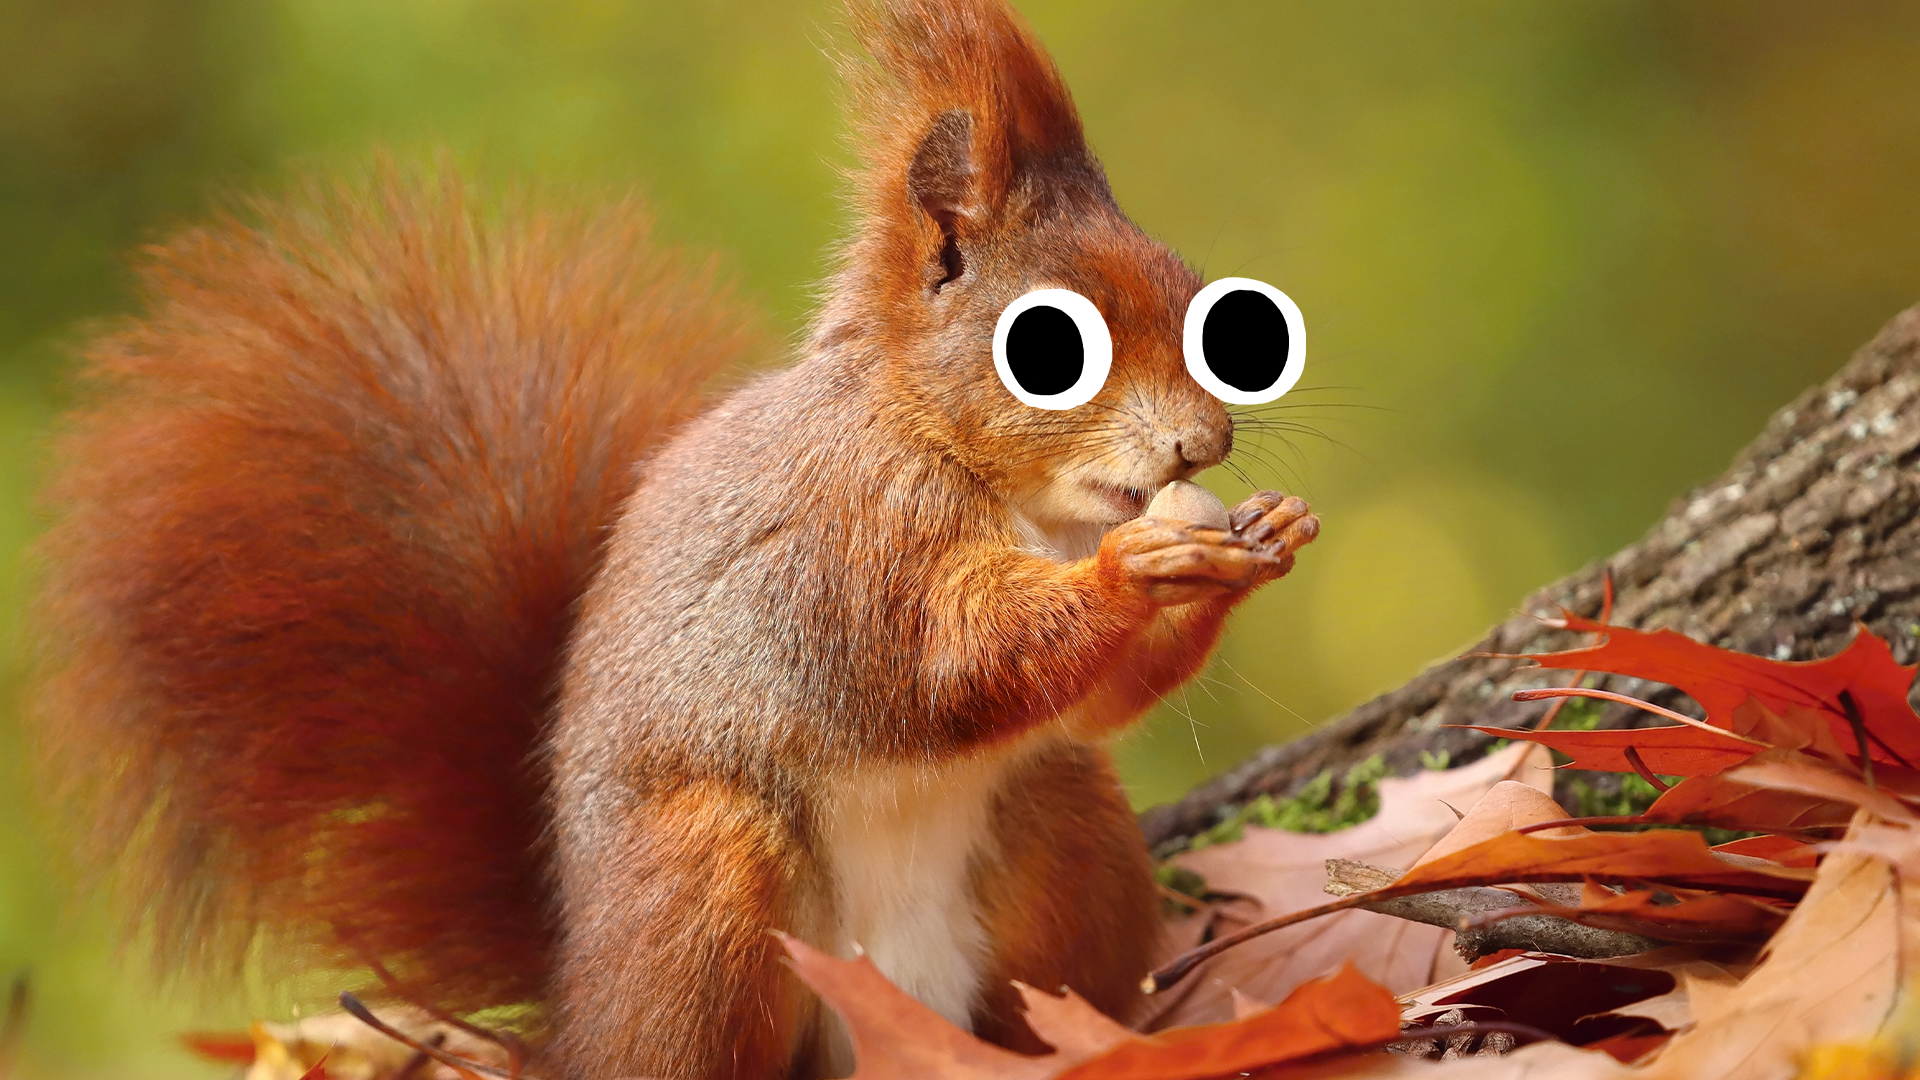 Goofy looking red squirrel 